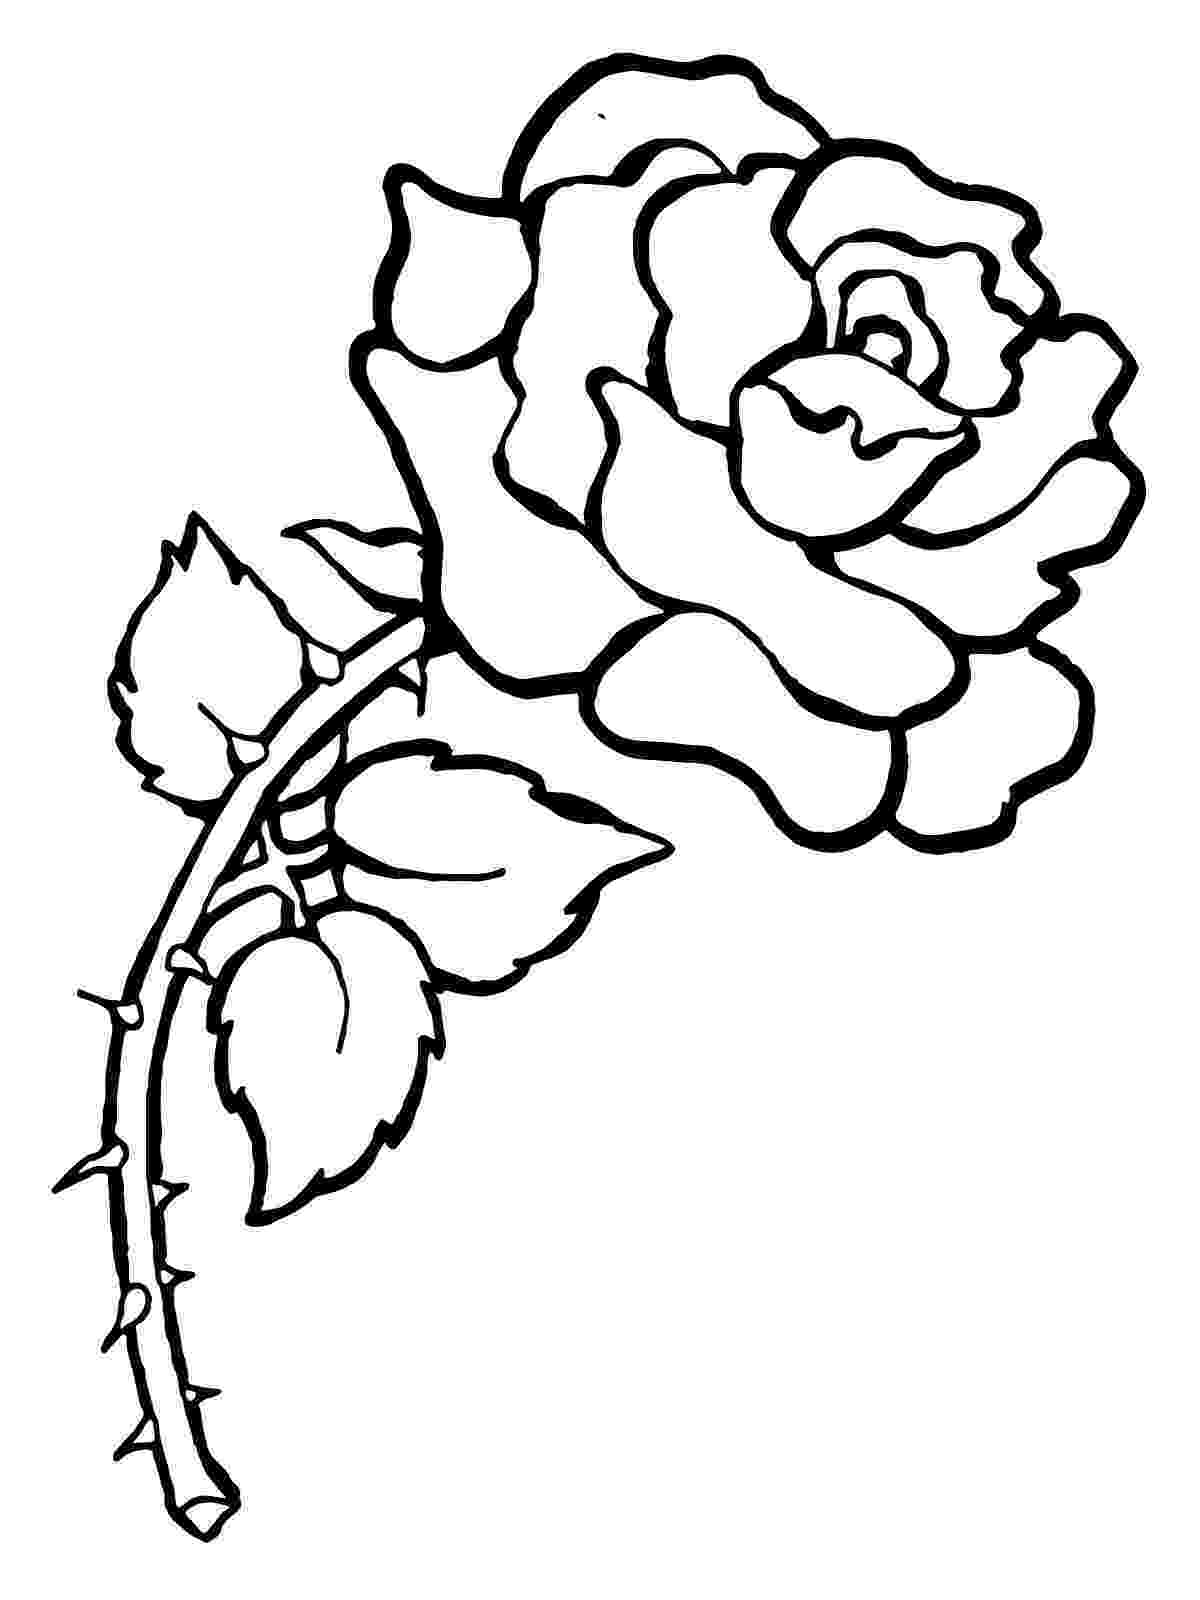 printable rose coloring pages free coloring pages sheets of roses 007 rose coloring pages coloring rose printable 